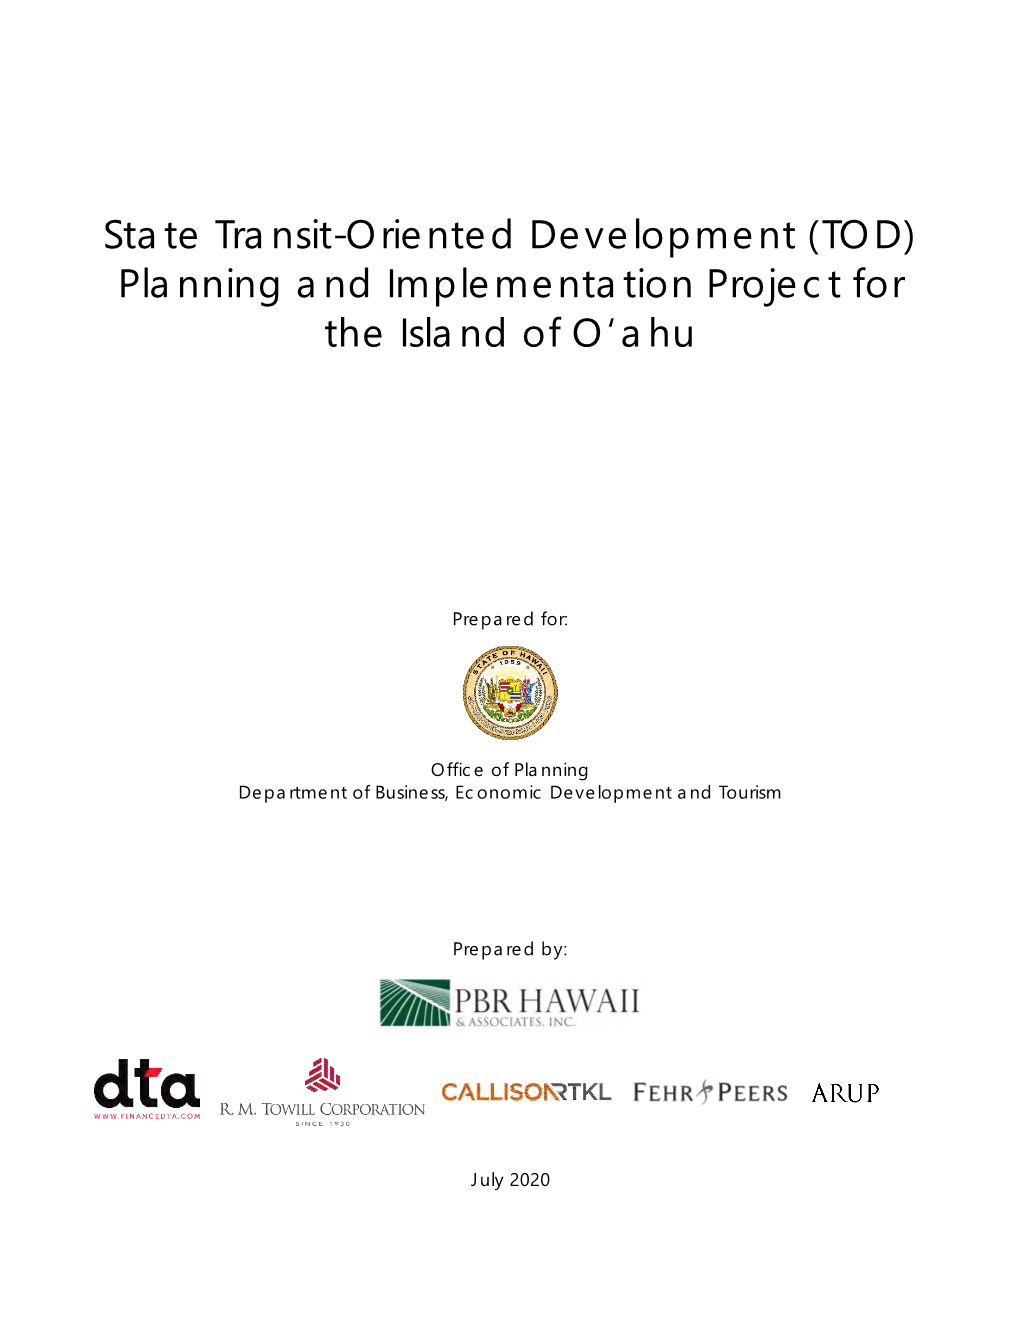 State TOD Planning & Implementation Project, Island of Oahu, Final